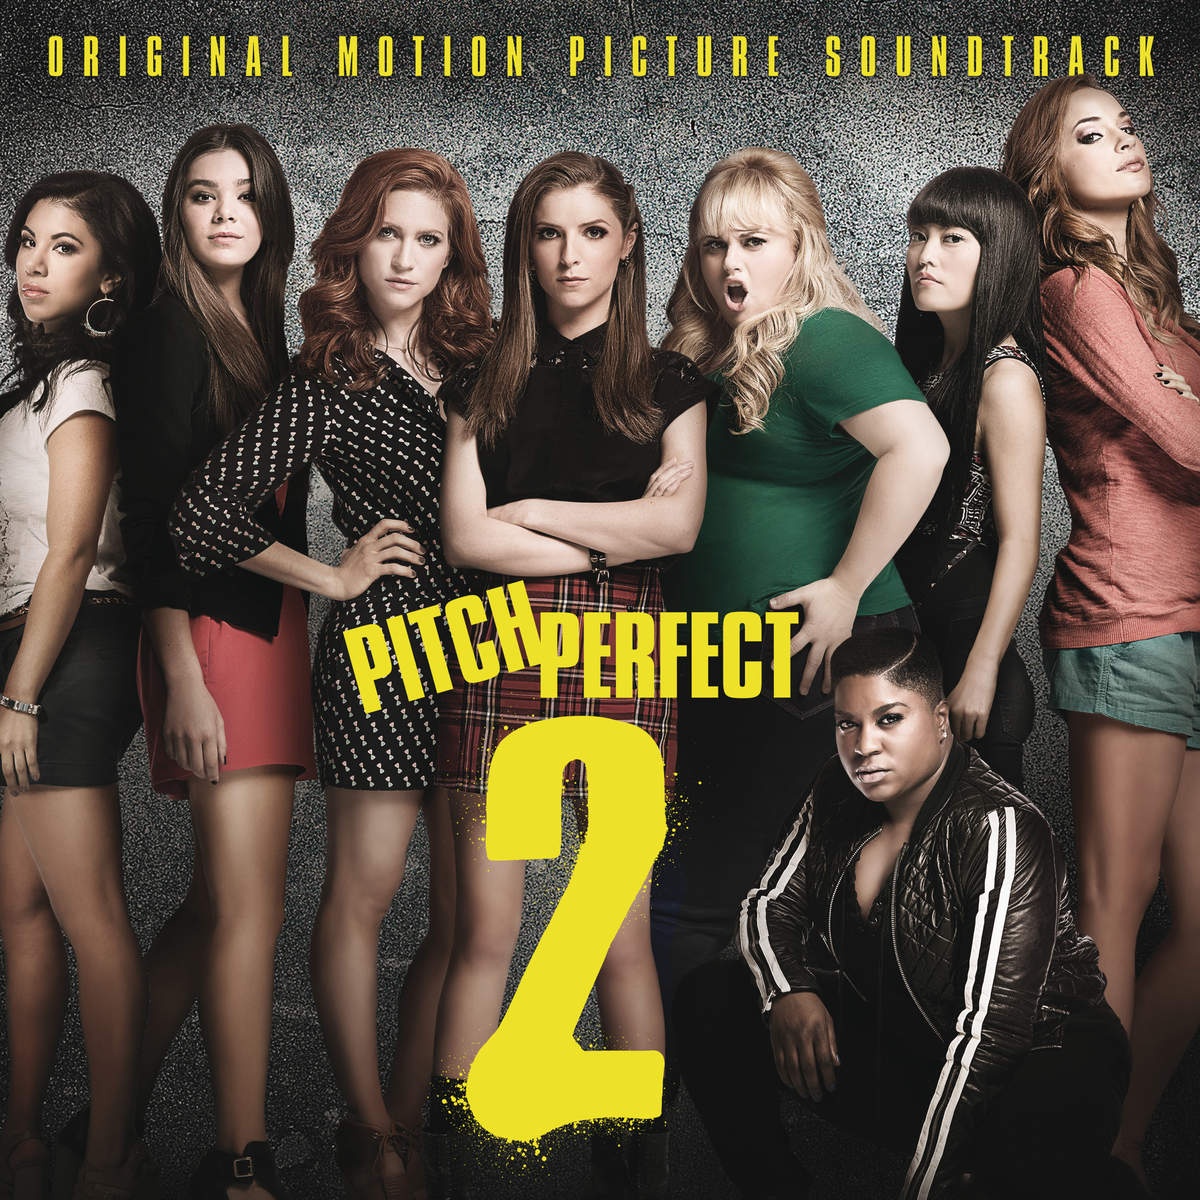 Lollipop - From "Pitch Perfect 2" Soundtrack